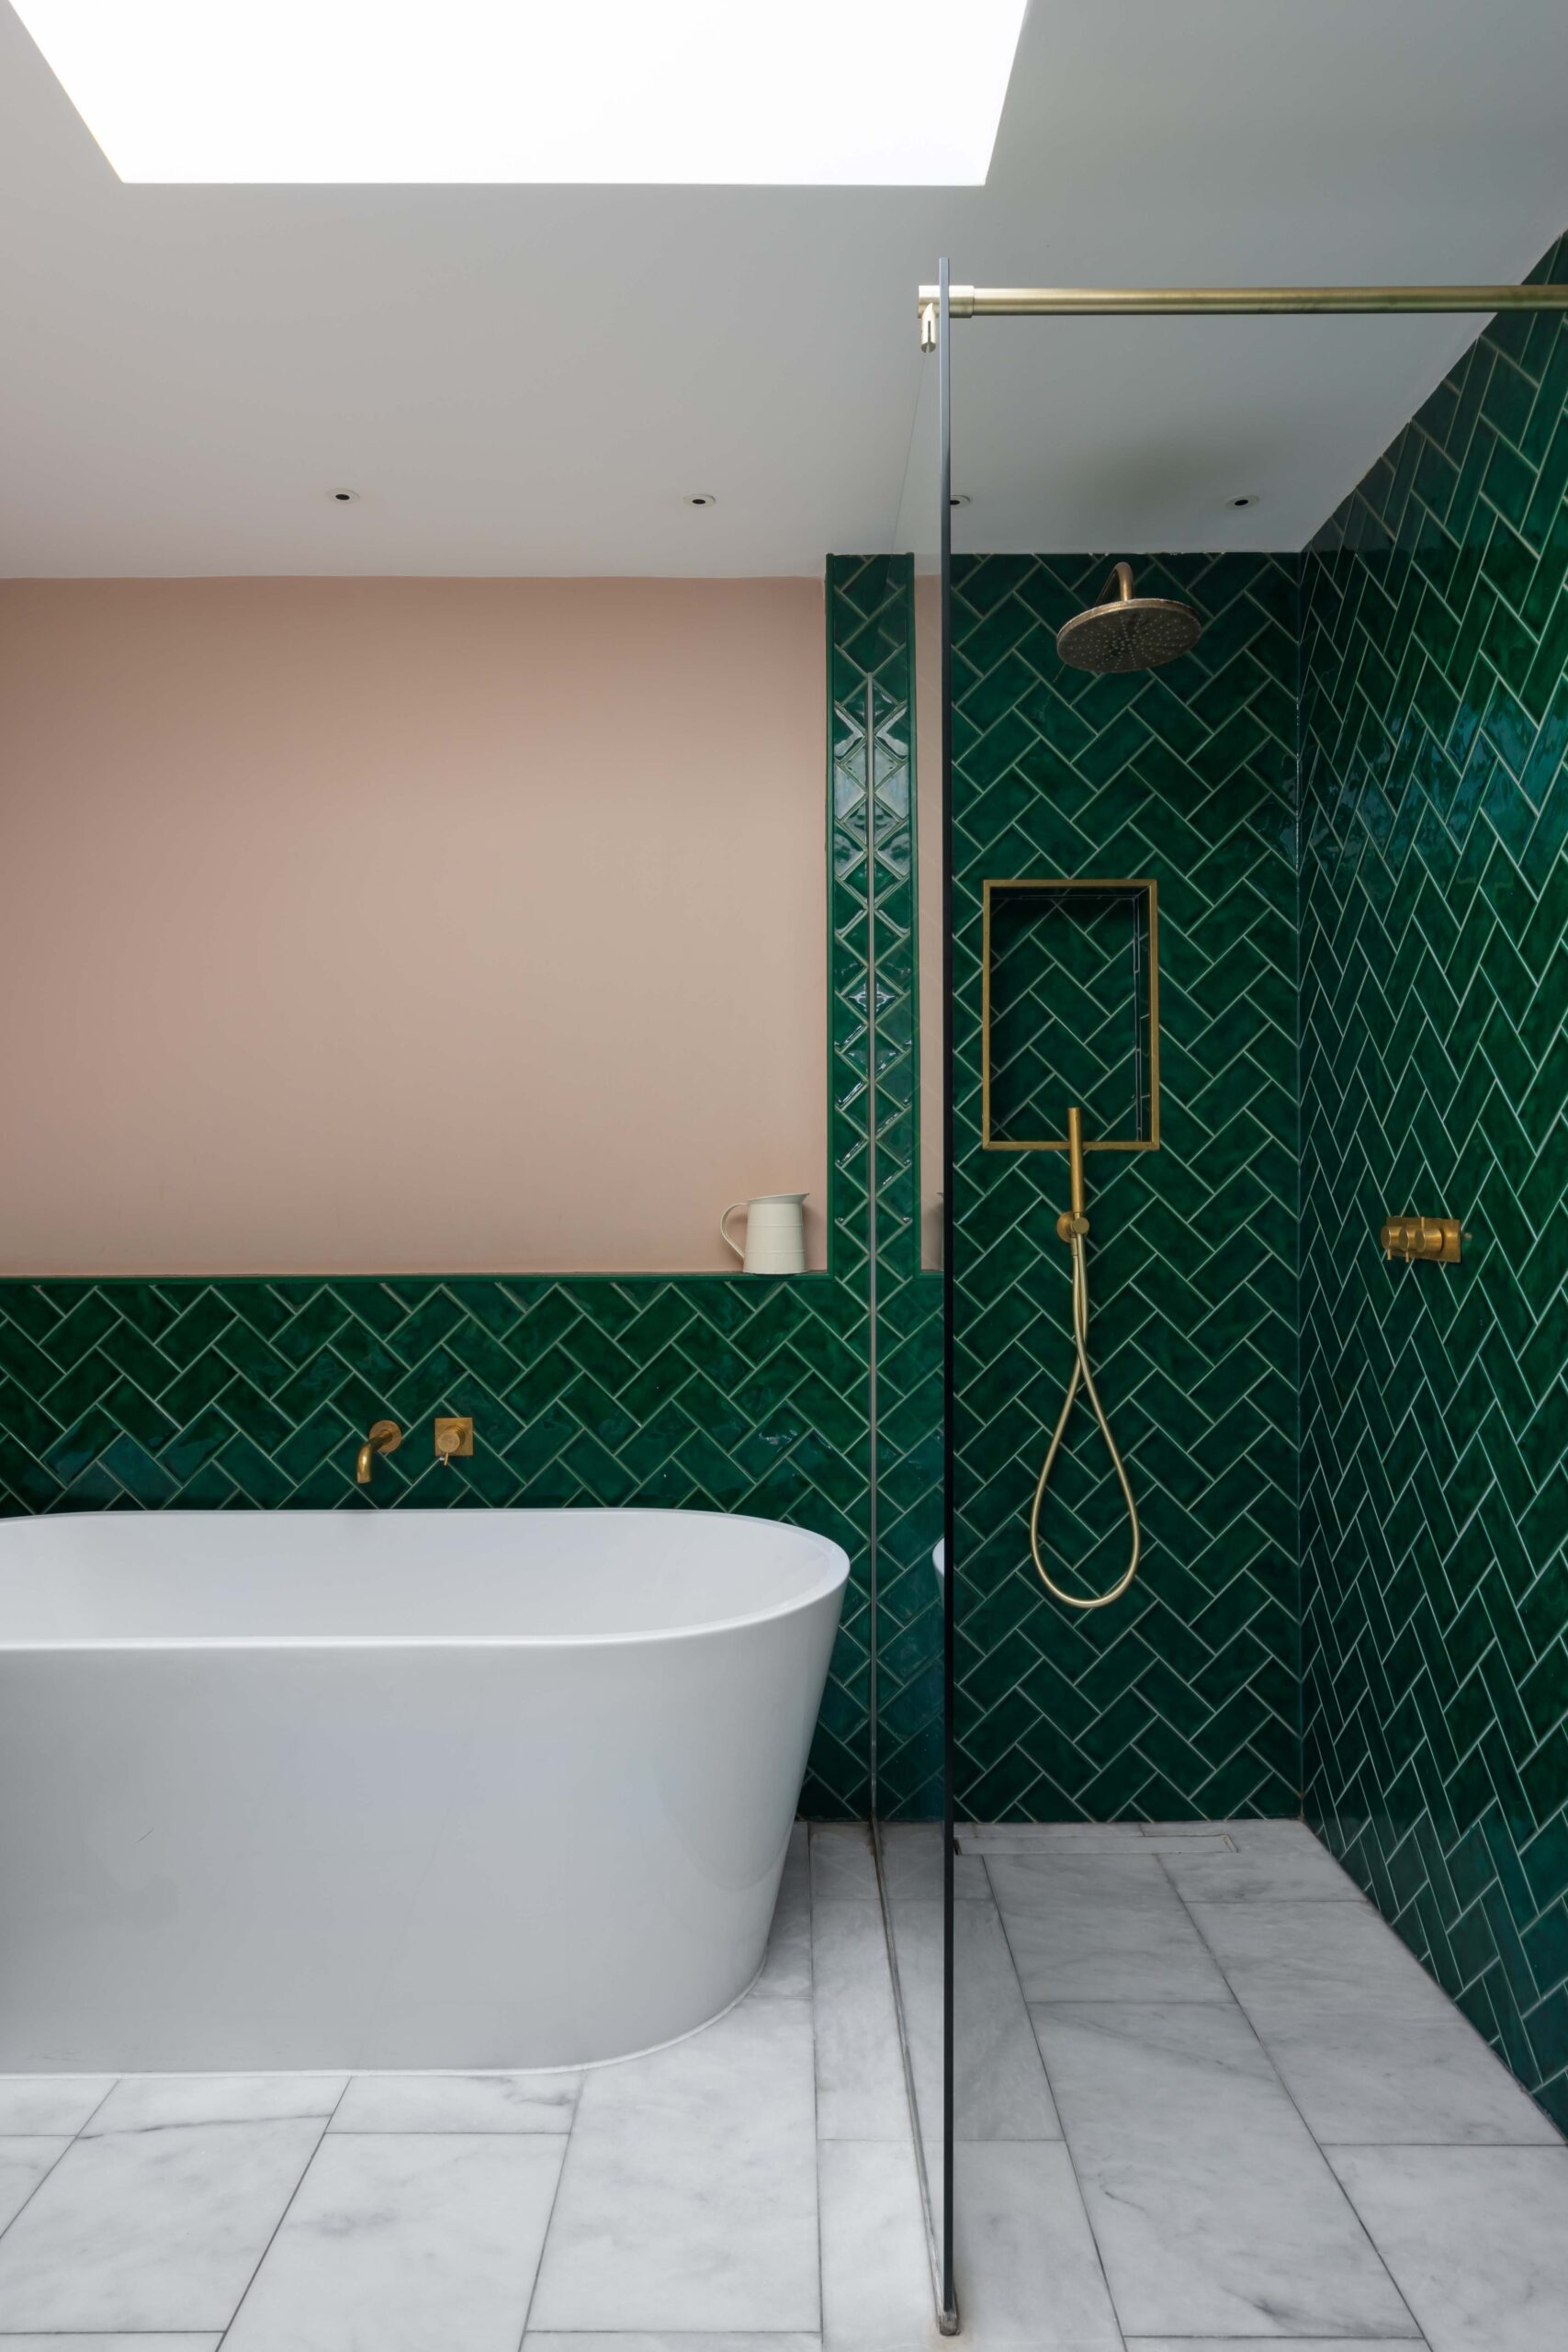 Kensington Park Road bathroom with freestanding tub and green parquet tiles